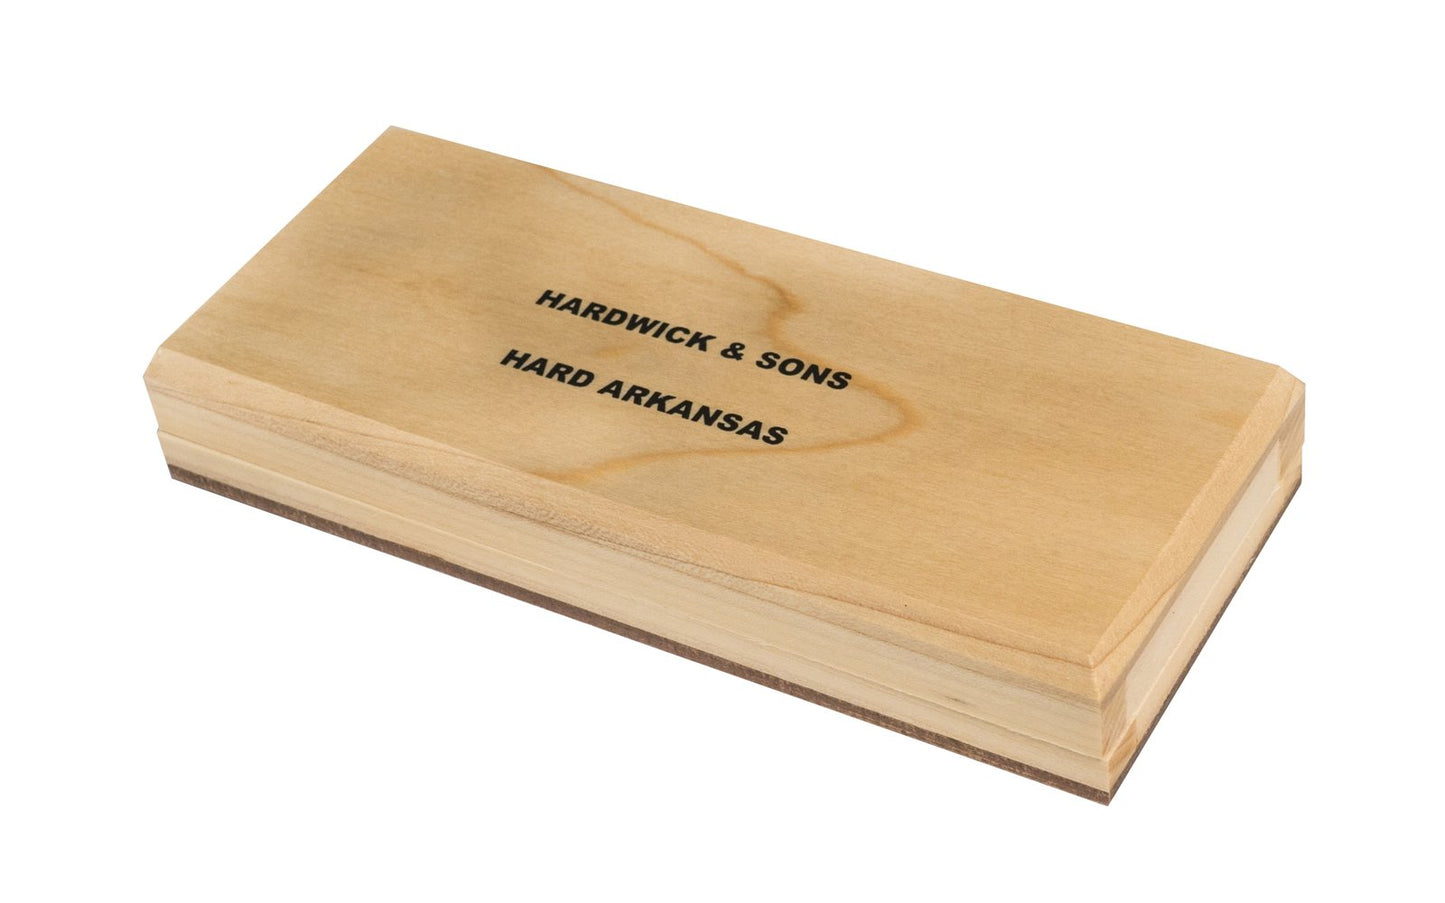 Hard Arkansas Bench Stone with Wooden Box ~ 6" x 2" - Made in USA ~ Super-fine stone that is satisfactory for the final edge on woodworking cutting tools & knives - Model No. FAB-62